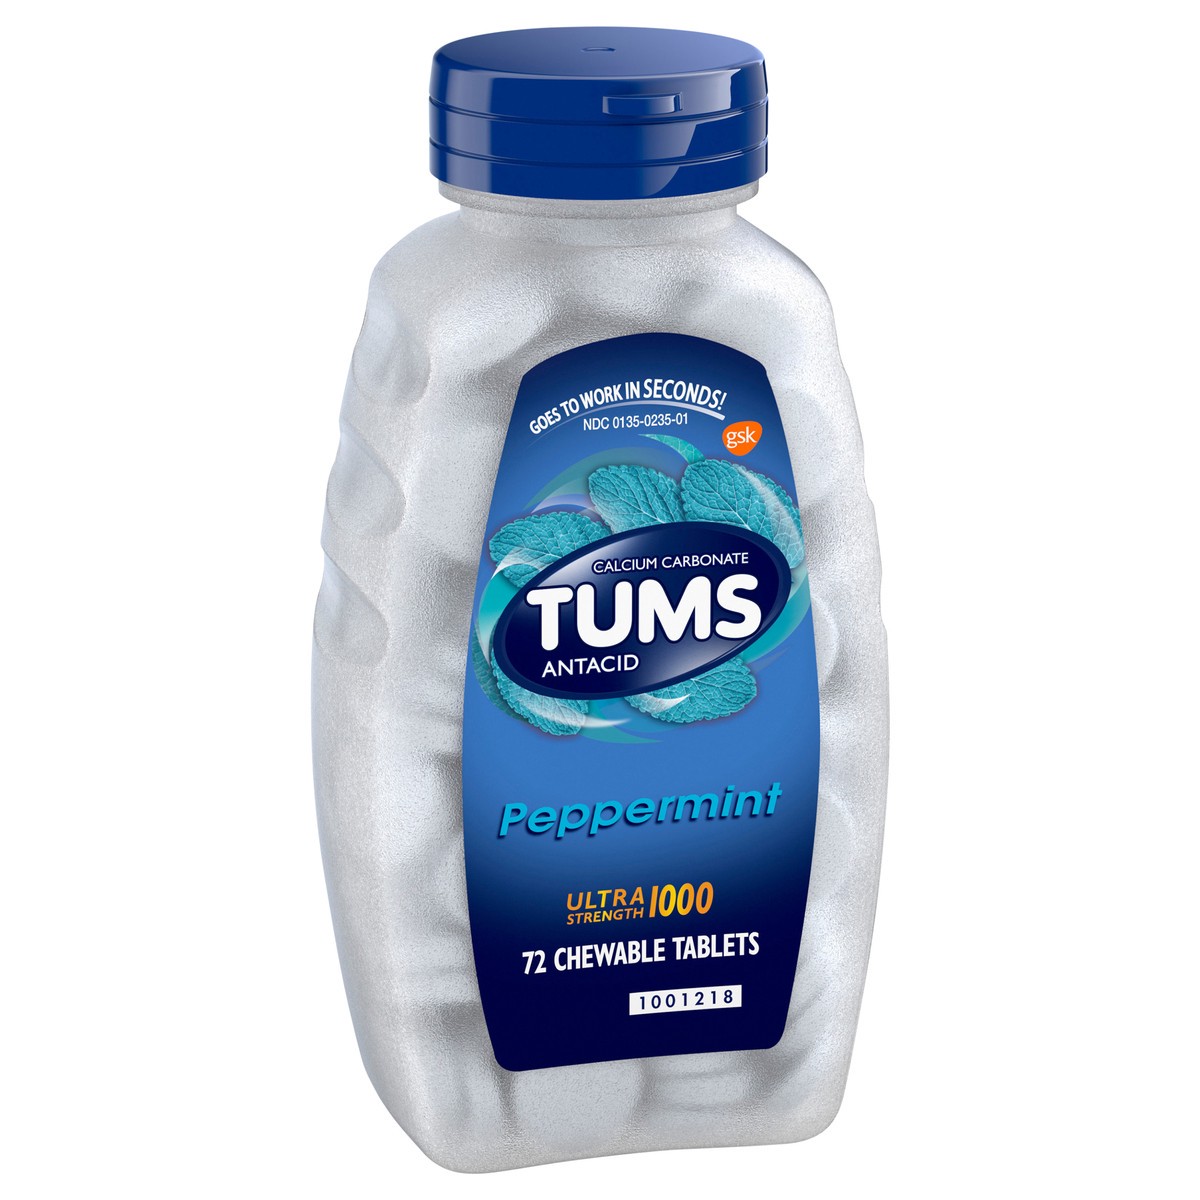 slide 2 of 9, TUMS Chewable Antacid Tablets for Ultra Strength Heartburn Relief, Peppermint - 72 Count, 72 ct